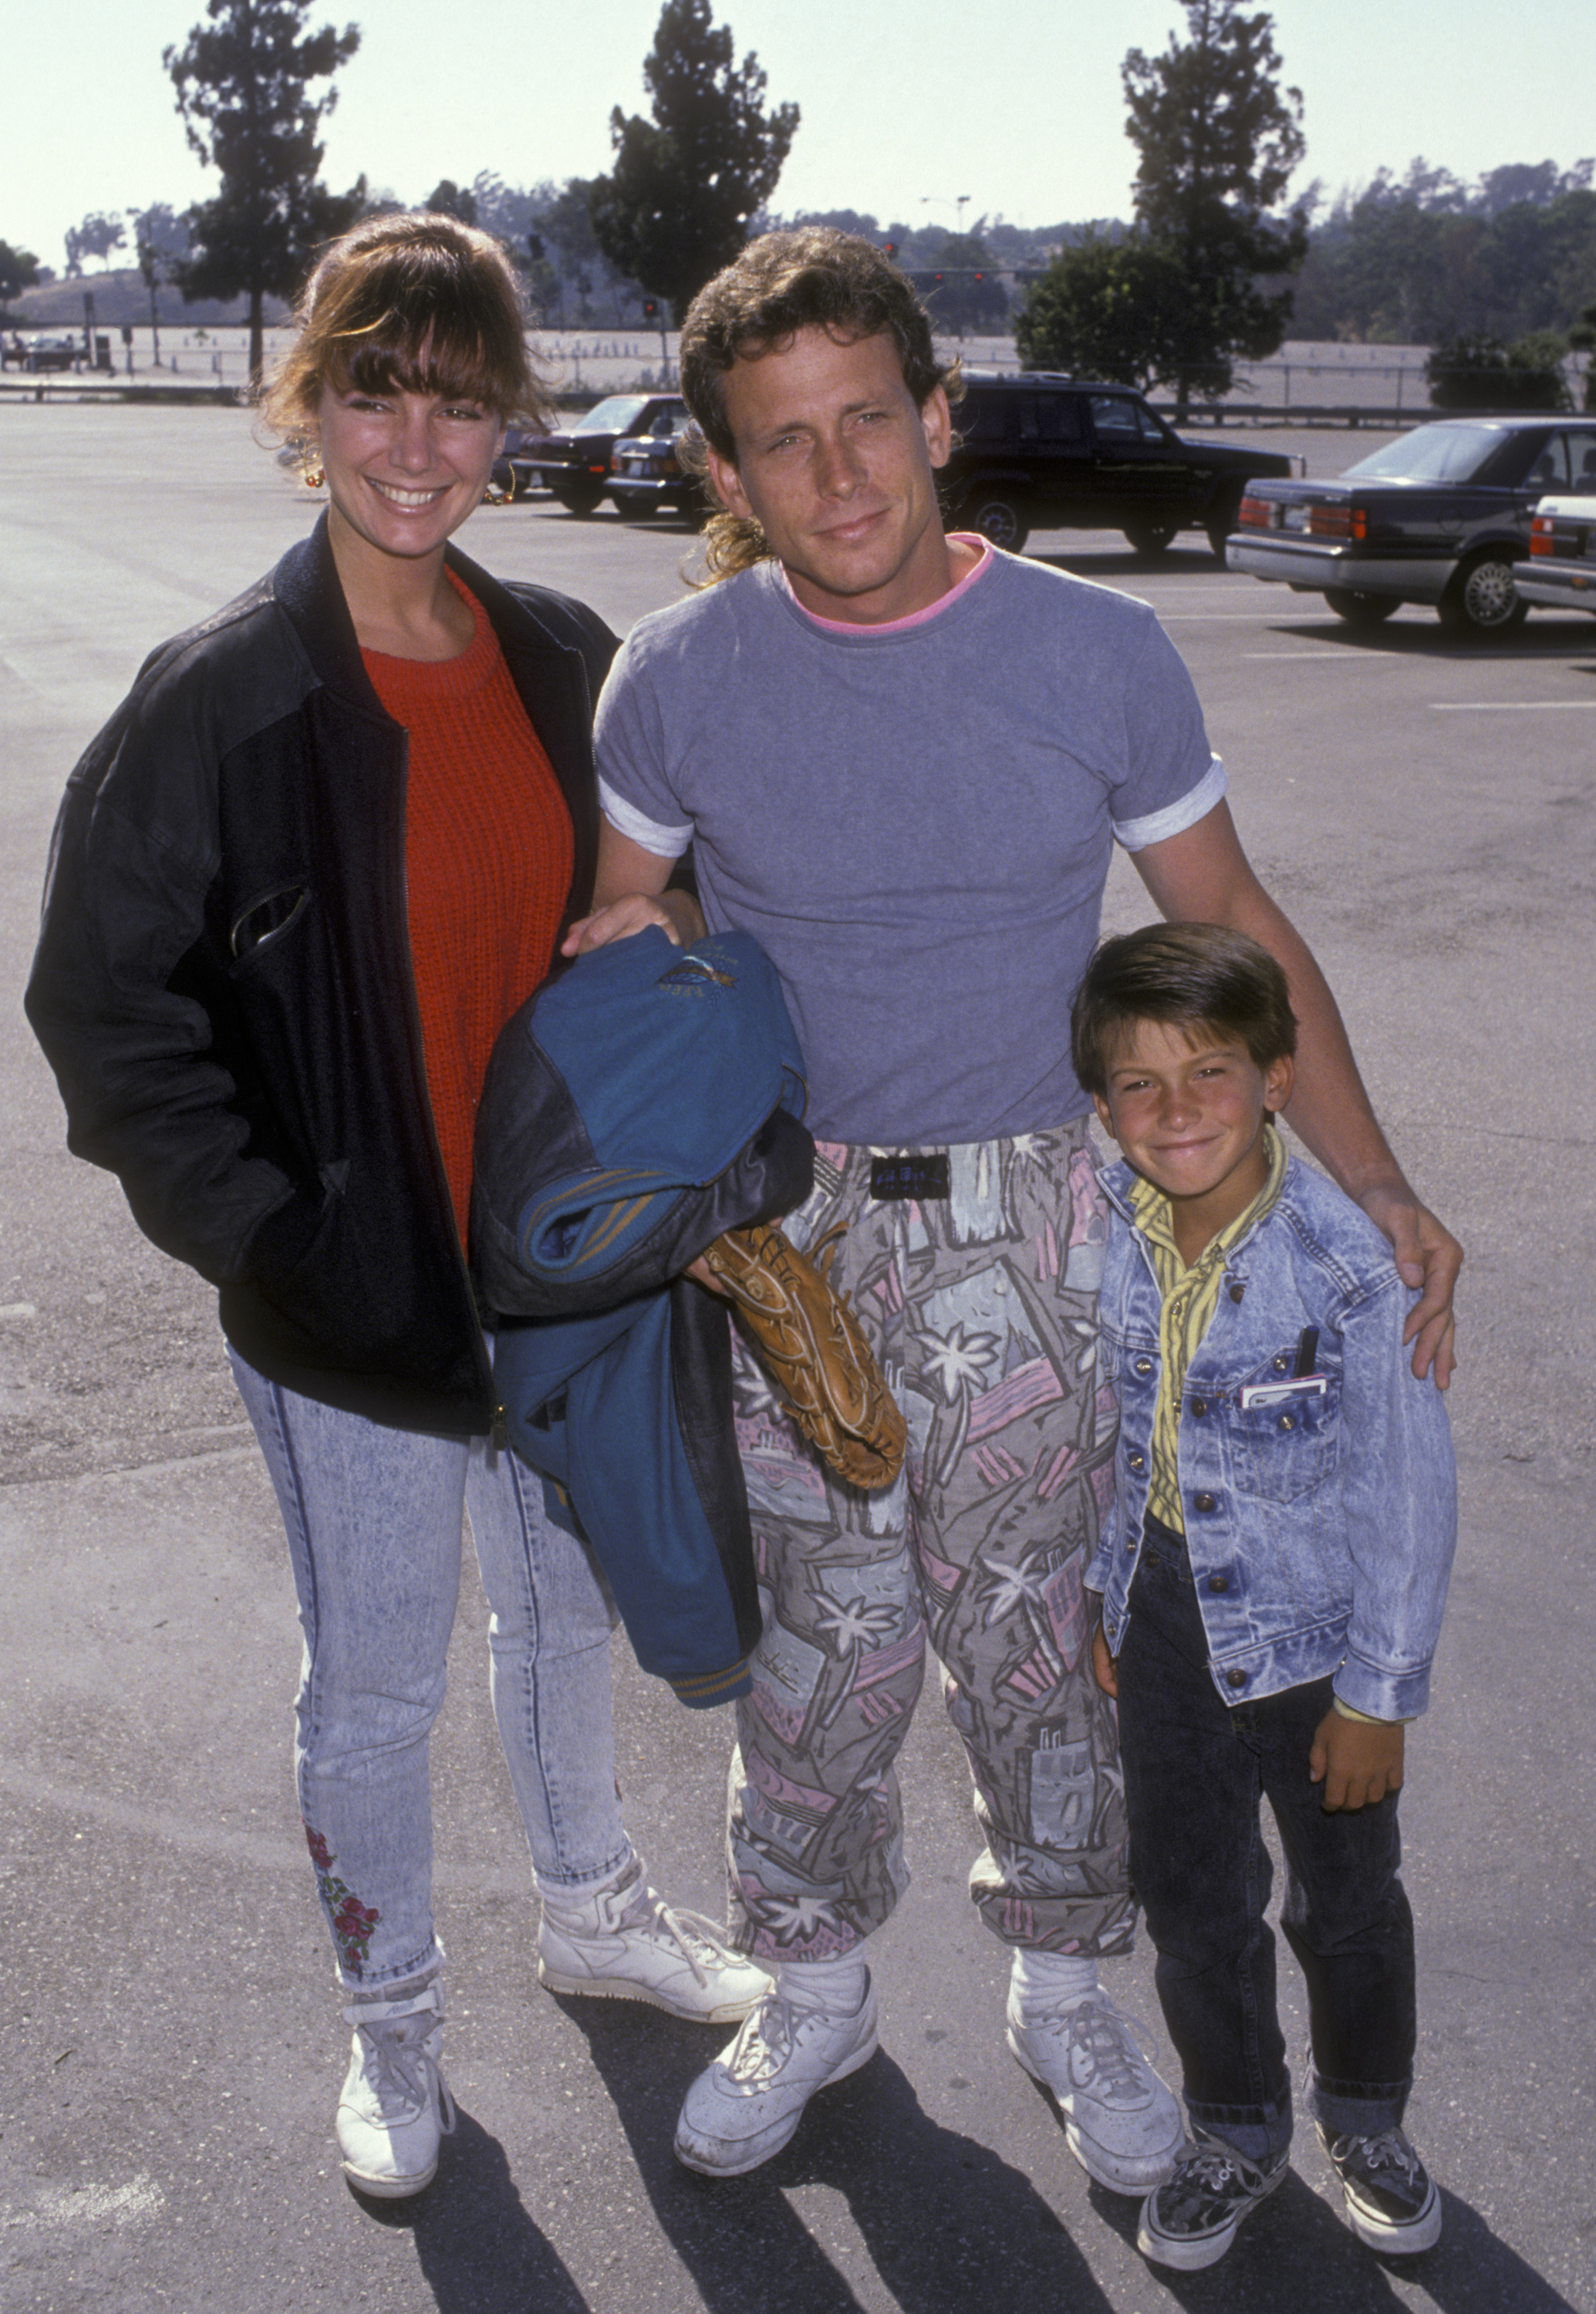 Actor Willie Aames and family attend Hollywood All-Star Game on August 26, 1989 at Dodger Stadium in Hollywood, California.| Source: Getty Images